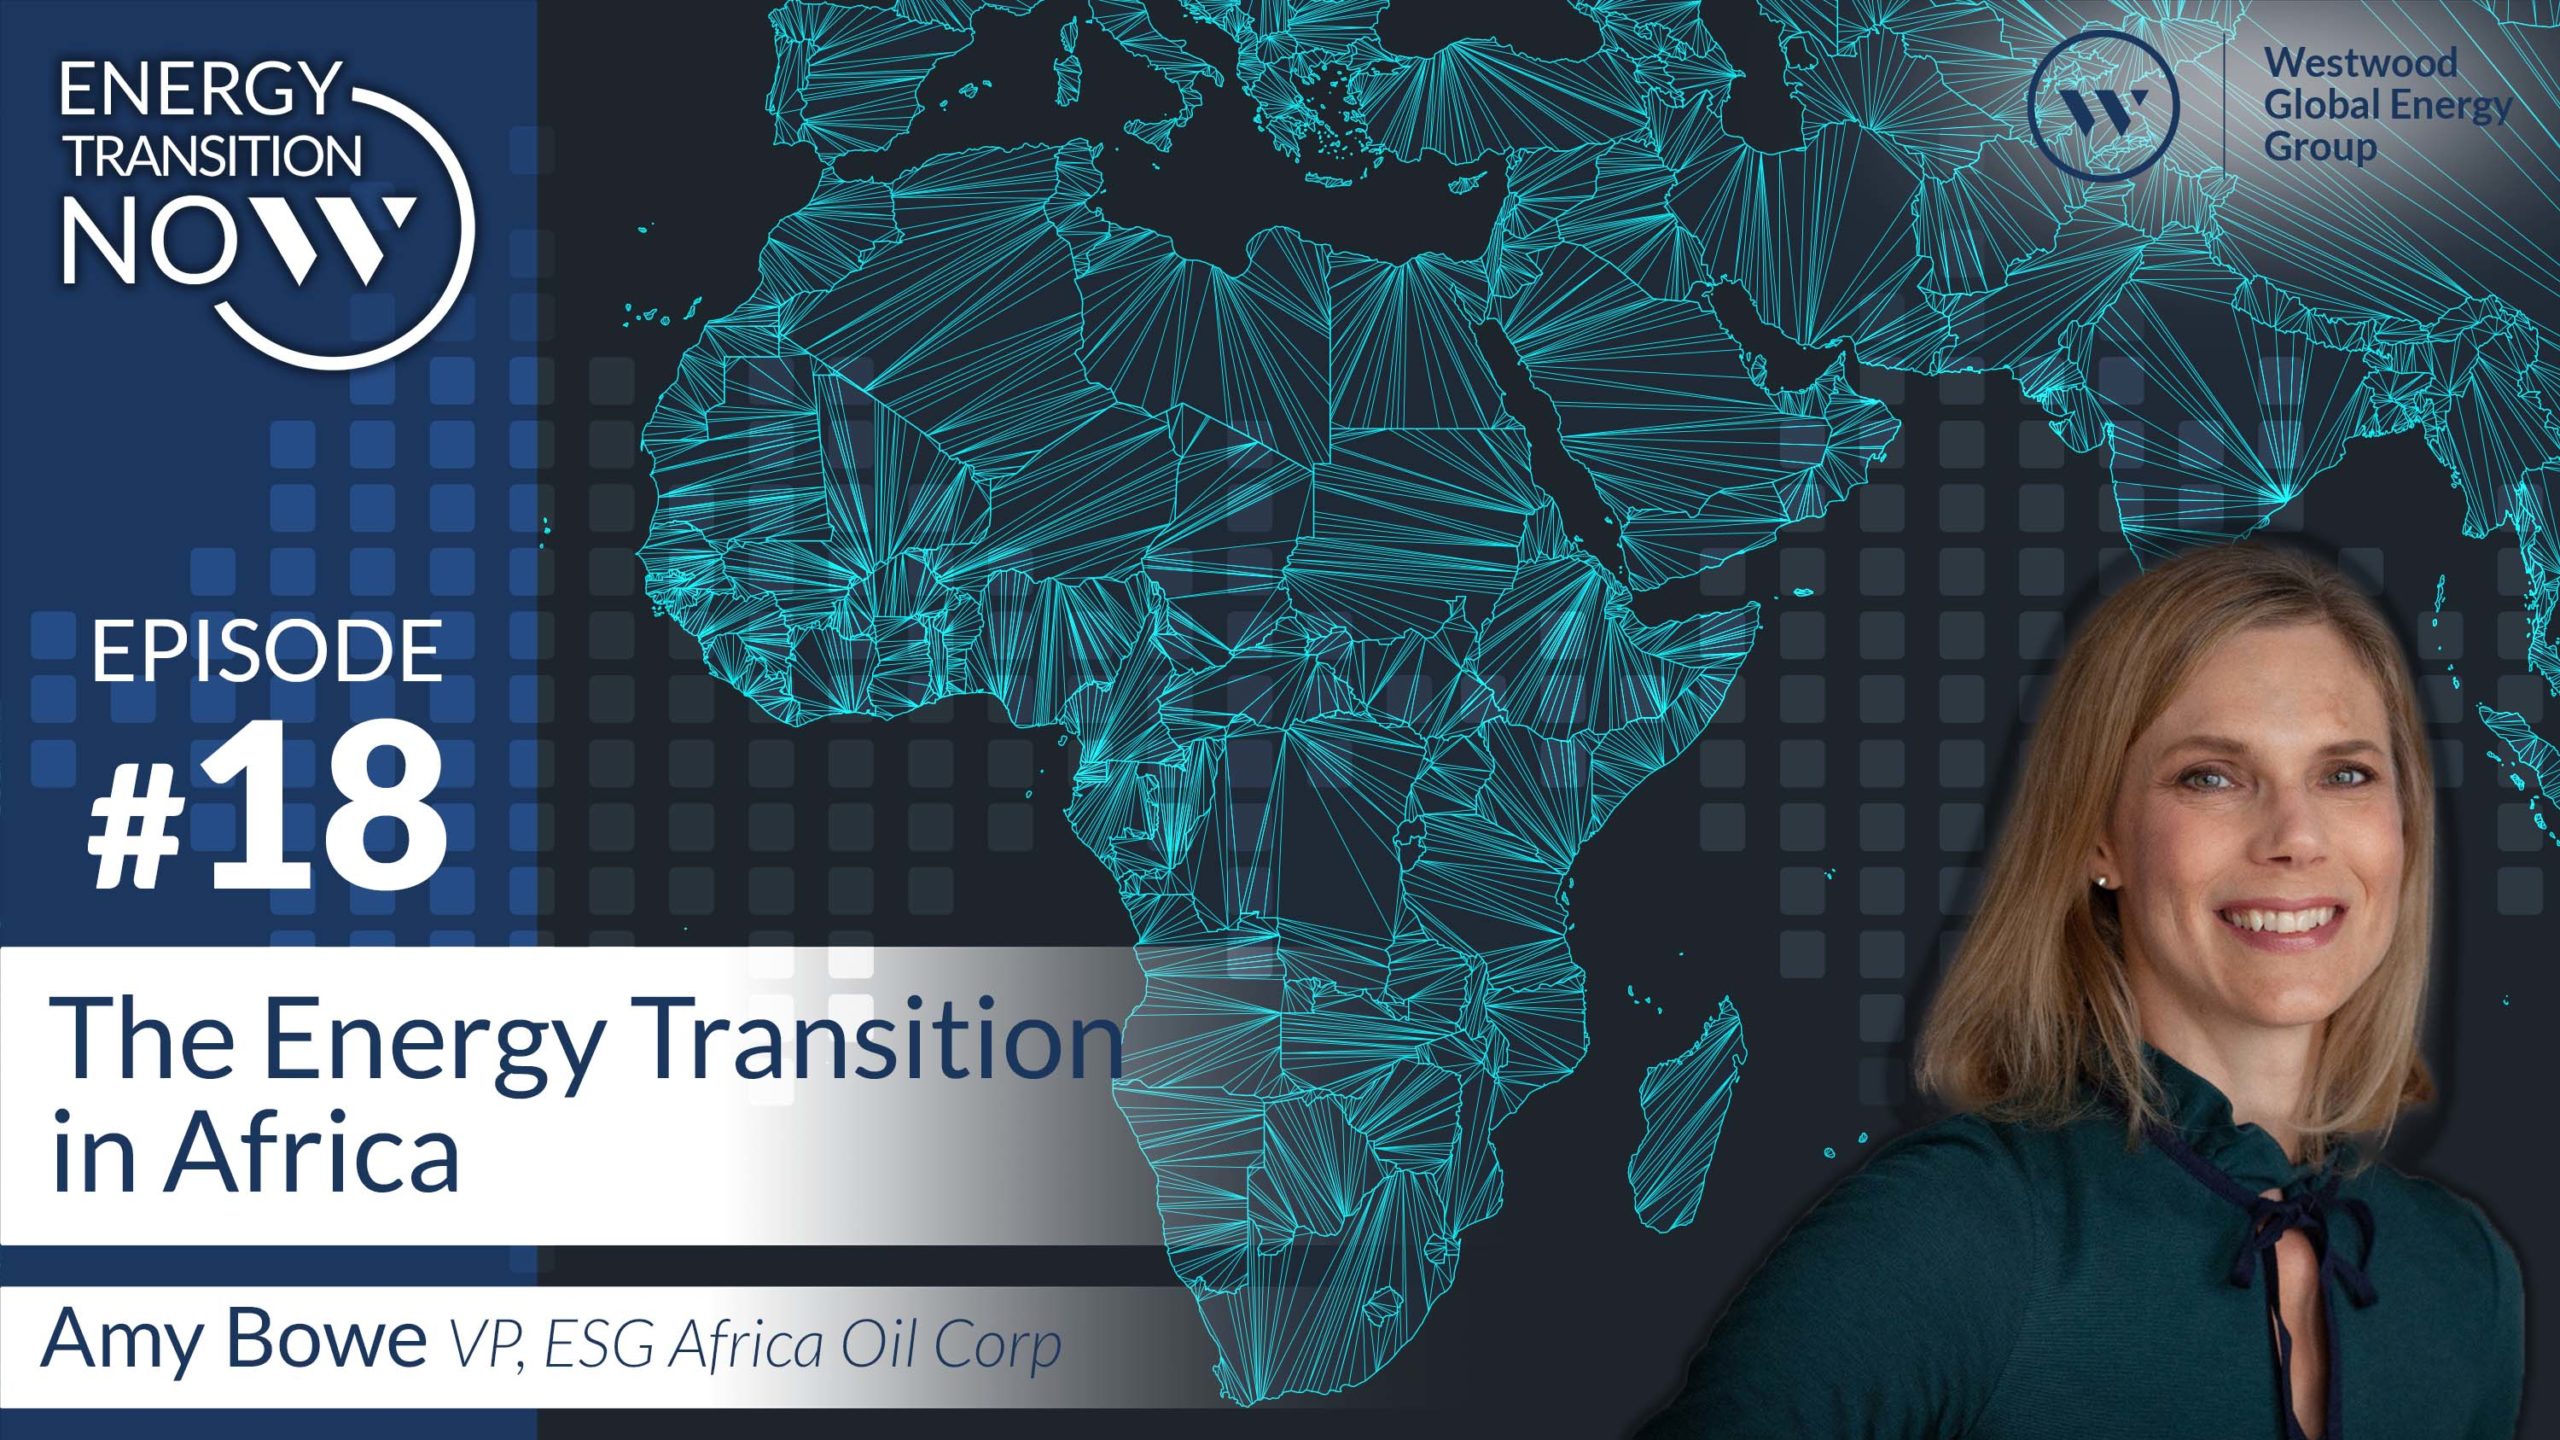 The energy transition in Africa